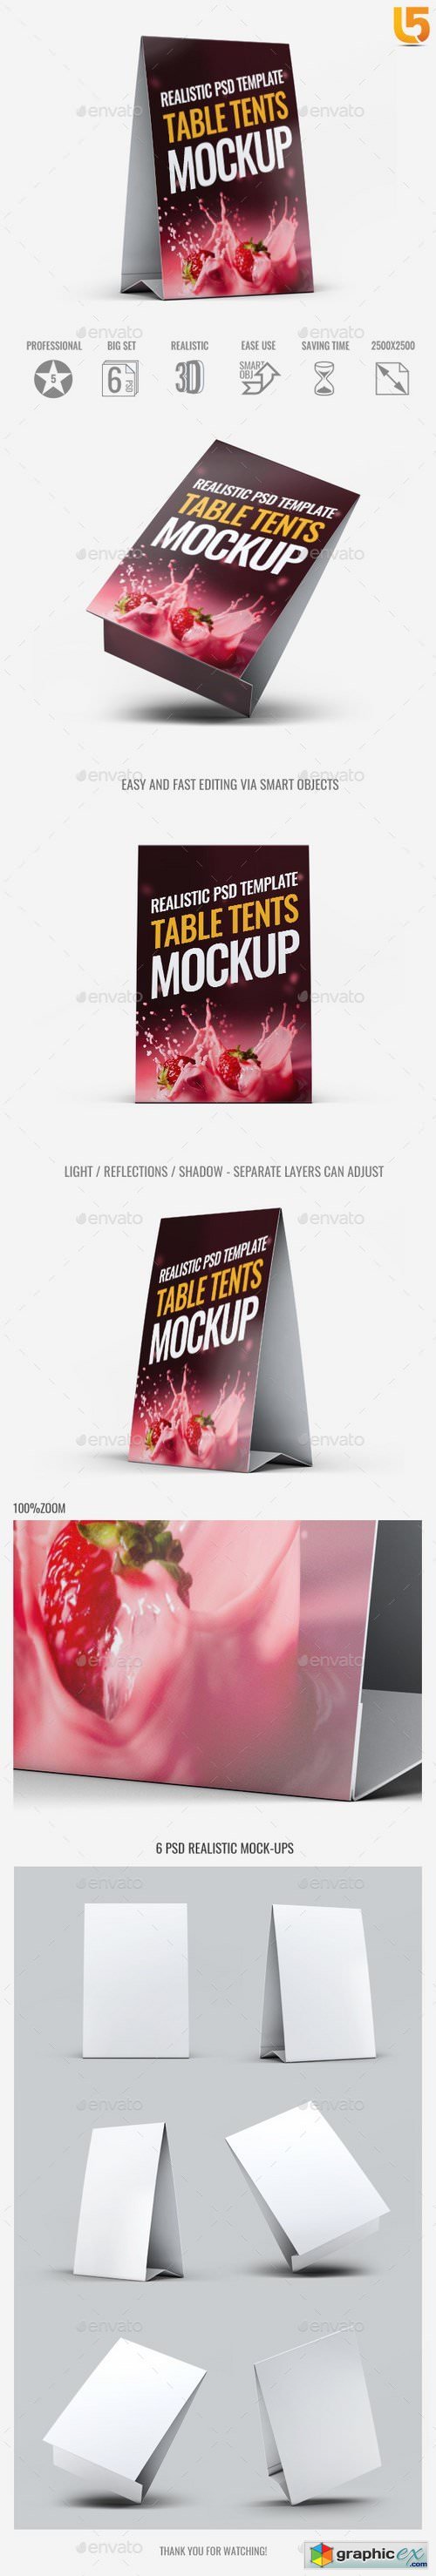 Table Tents Mock-Up V1